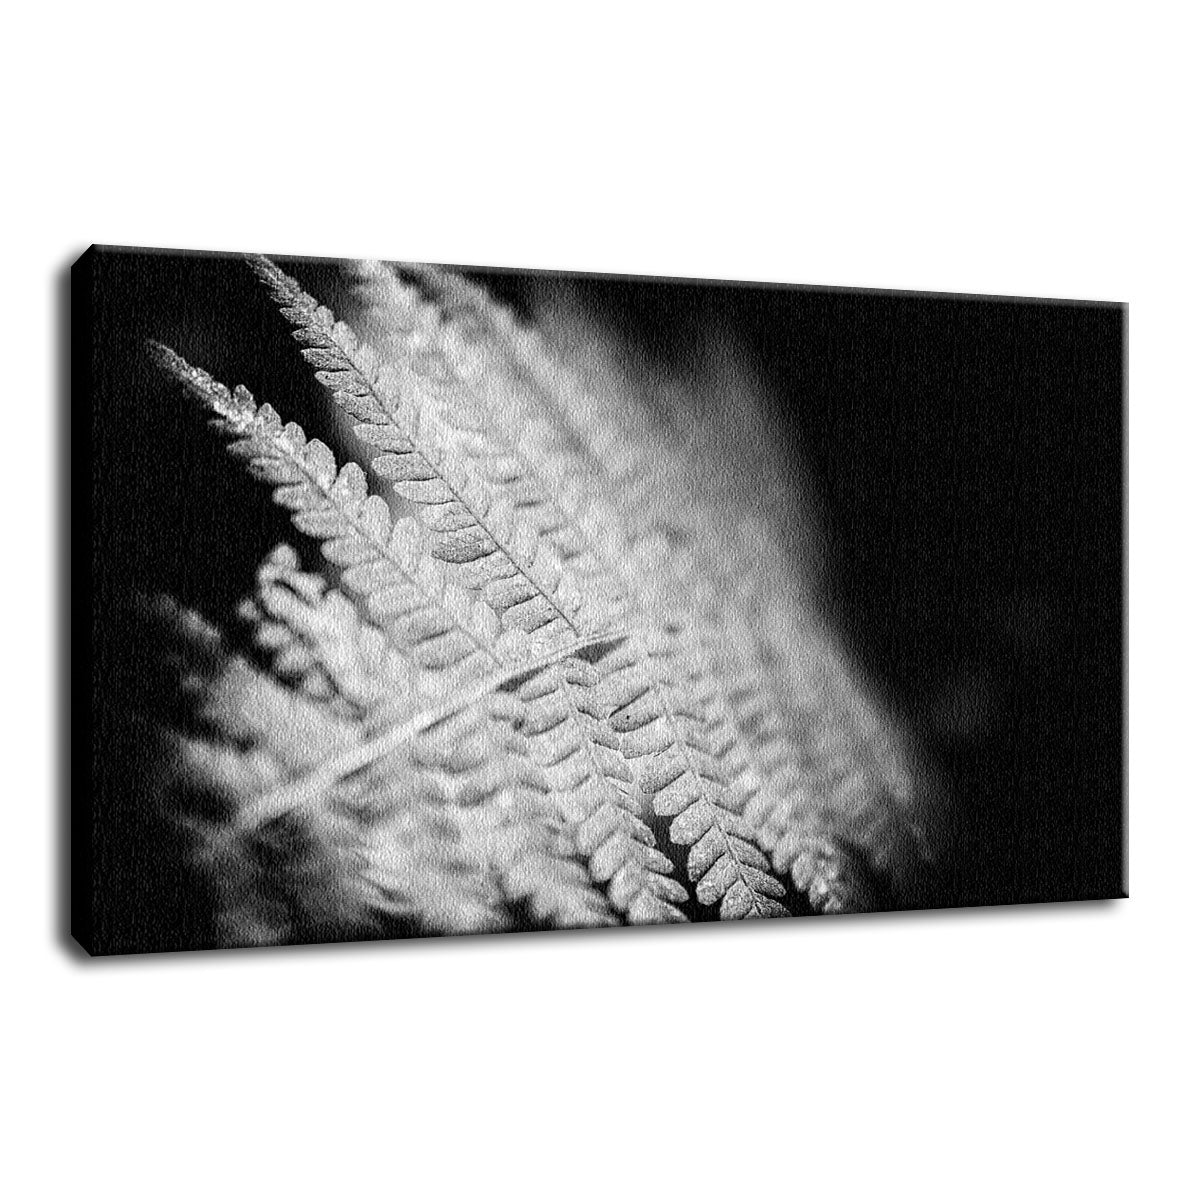 Fern Leaf in the Sunlight Botanical / Nature Photo Fine Art Canvas Wall Art Prints  - PIPAFINEART